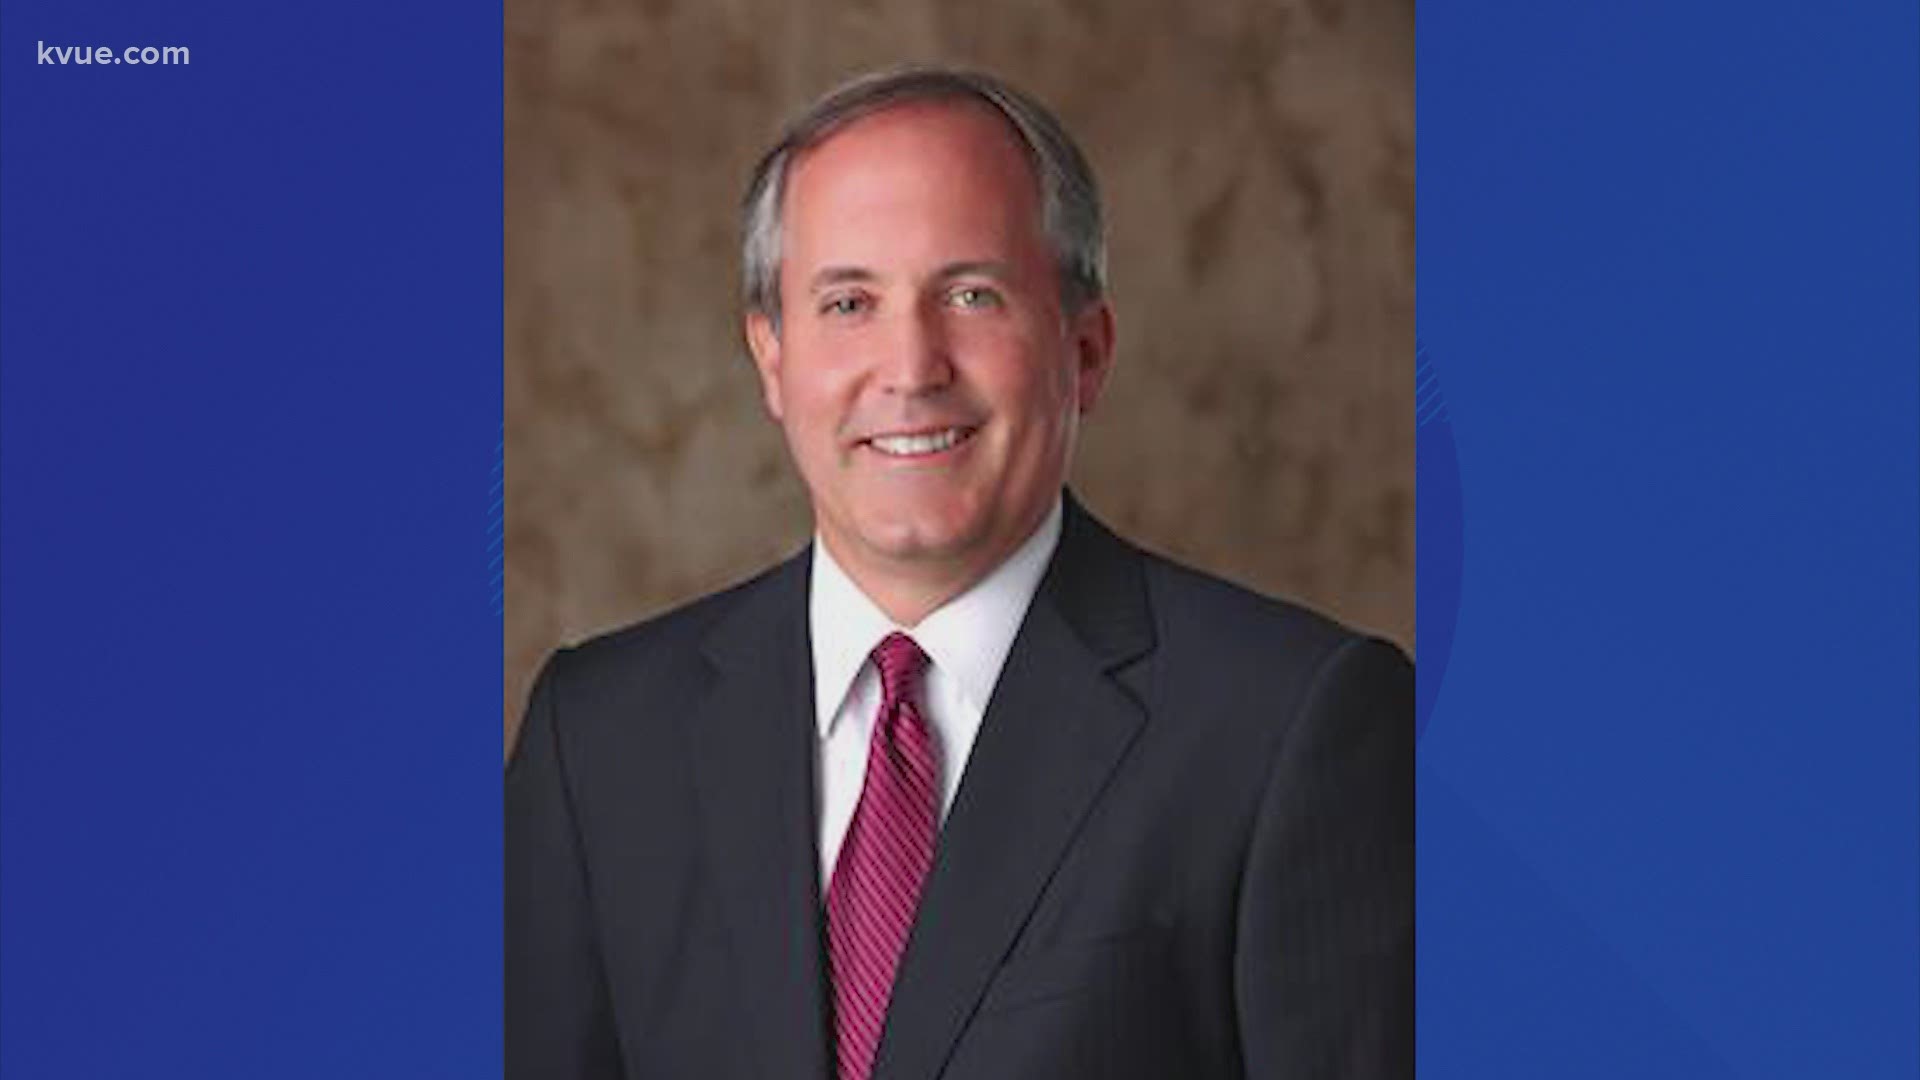 Texas Attorney General Ken Paxton is accused of having an extramarital affair with a woman and recommending her for a job.